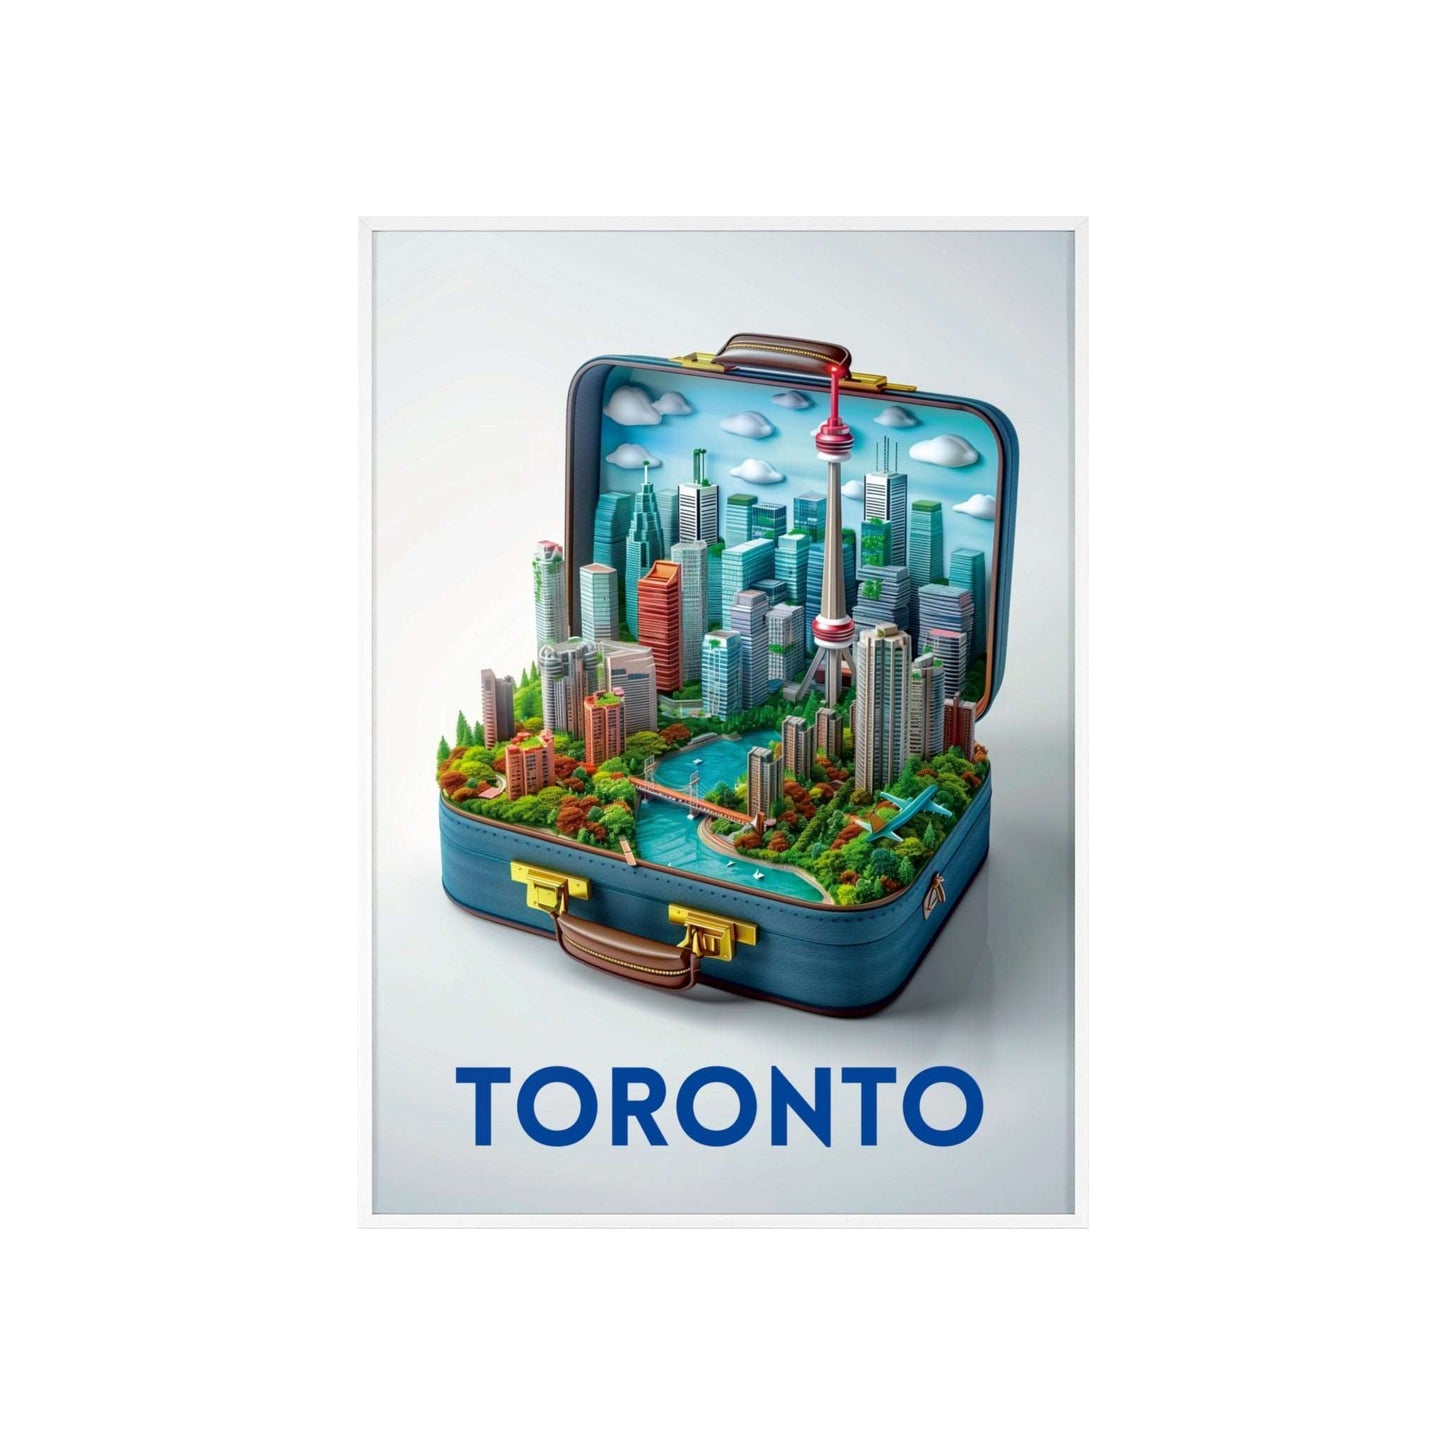 Travel poster titled "Toronto in a Suitcase" featuring a stylized illustration capturing the essence of Toronto. The poster is designed for modern home decor.